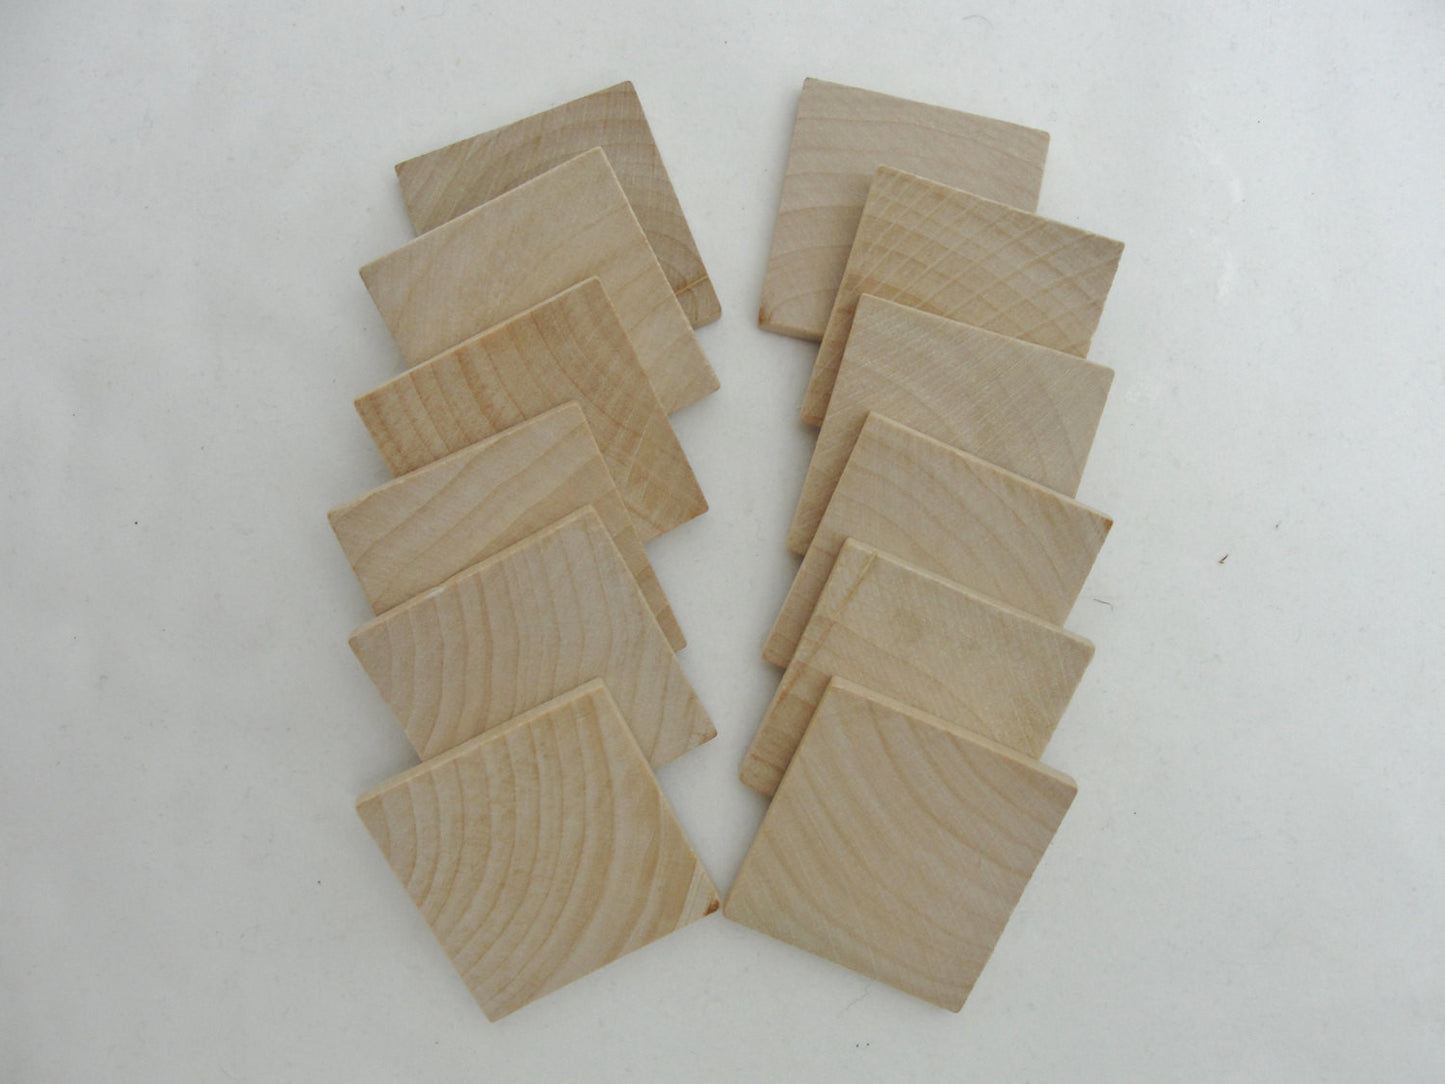 Wooden square tiles 1.5 inch (1 1/2") by 3/16" thick set of 12 - Wood parts - Craft Supply House